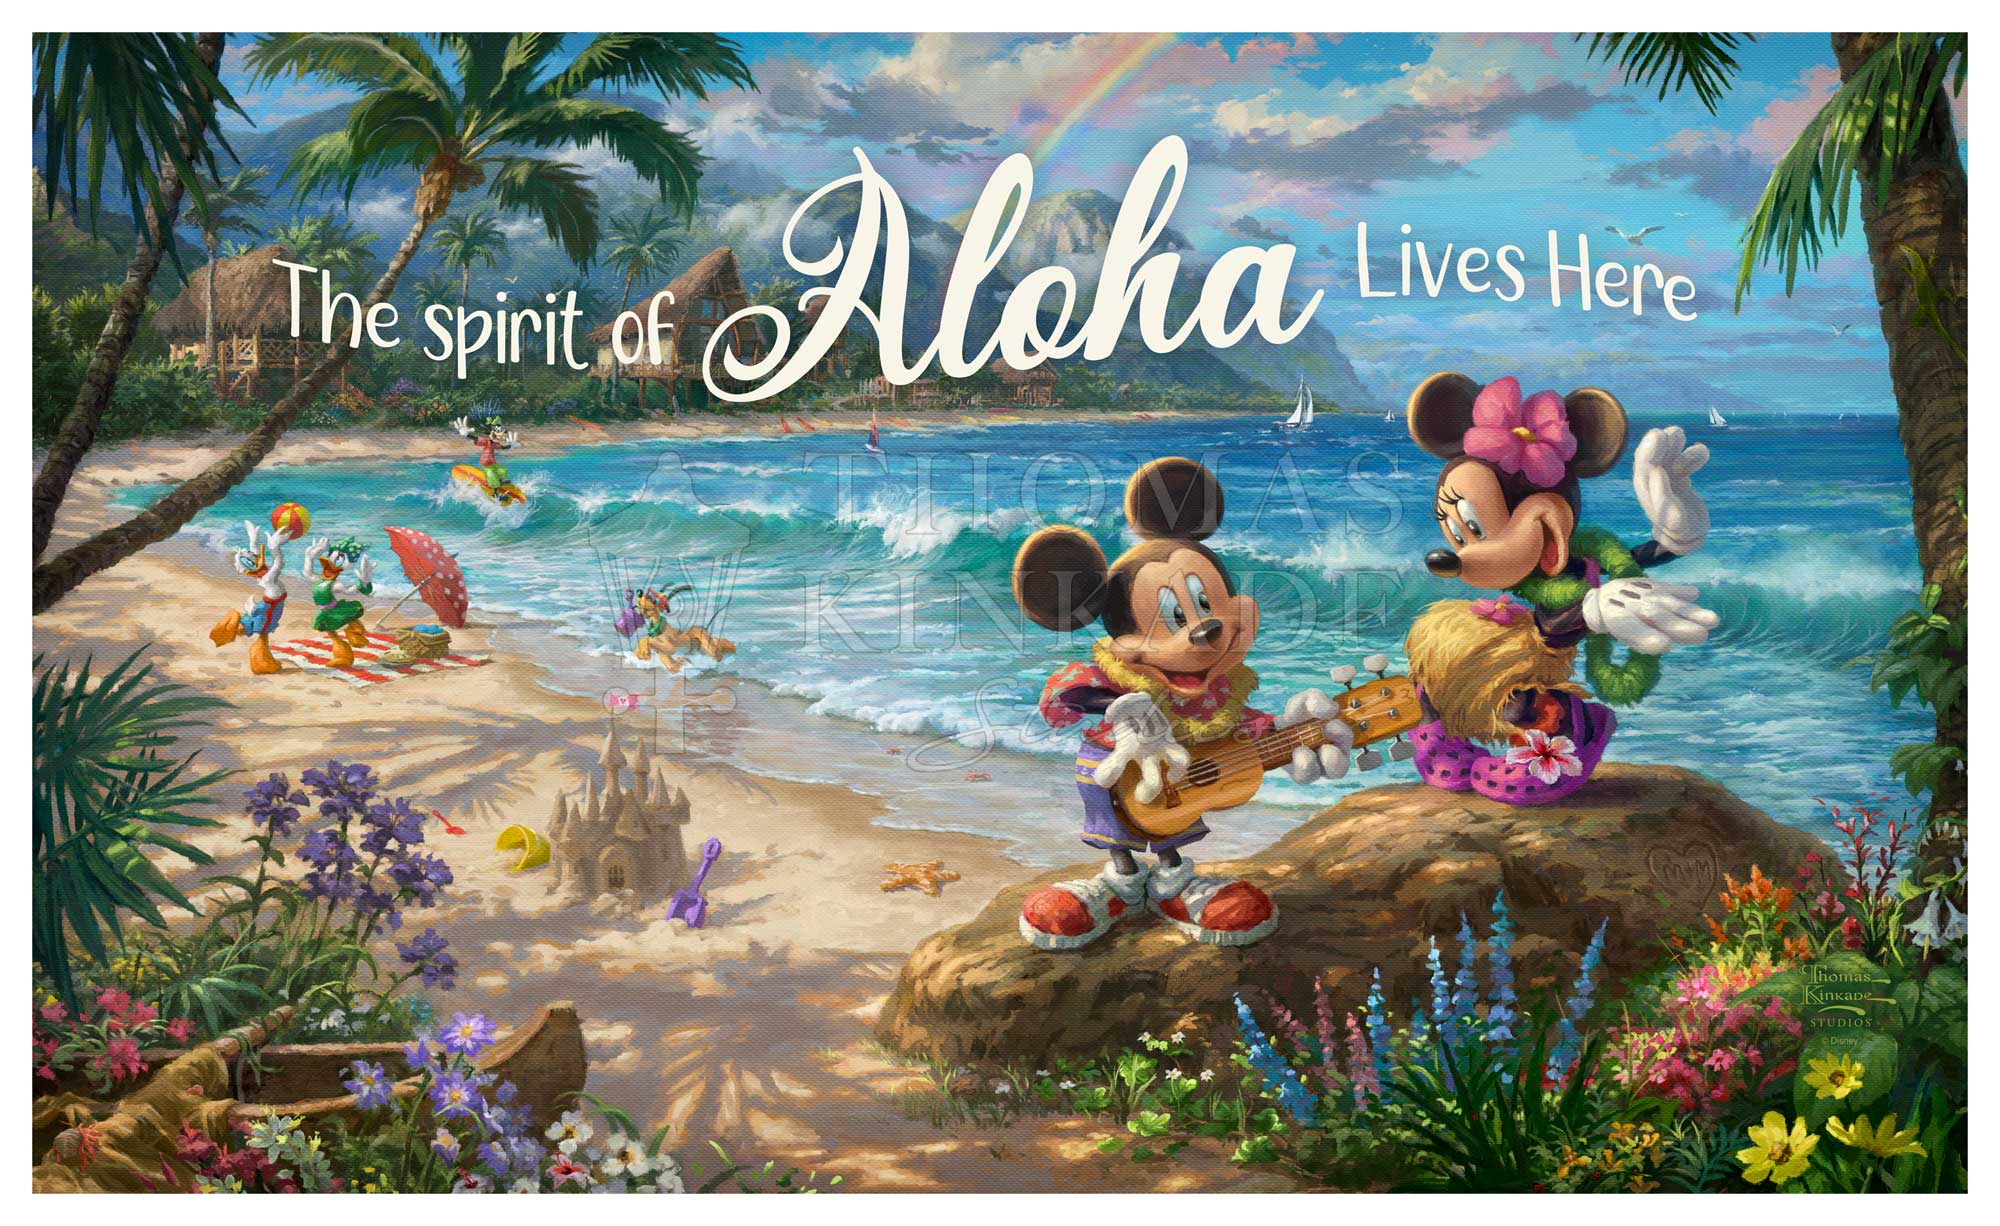 Mickey Mouse, Minnie Mouse, Donald Duck, Goofy, and Pluto as they set out on a Hawaiian Island getaway. Wood Signs